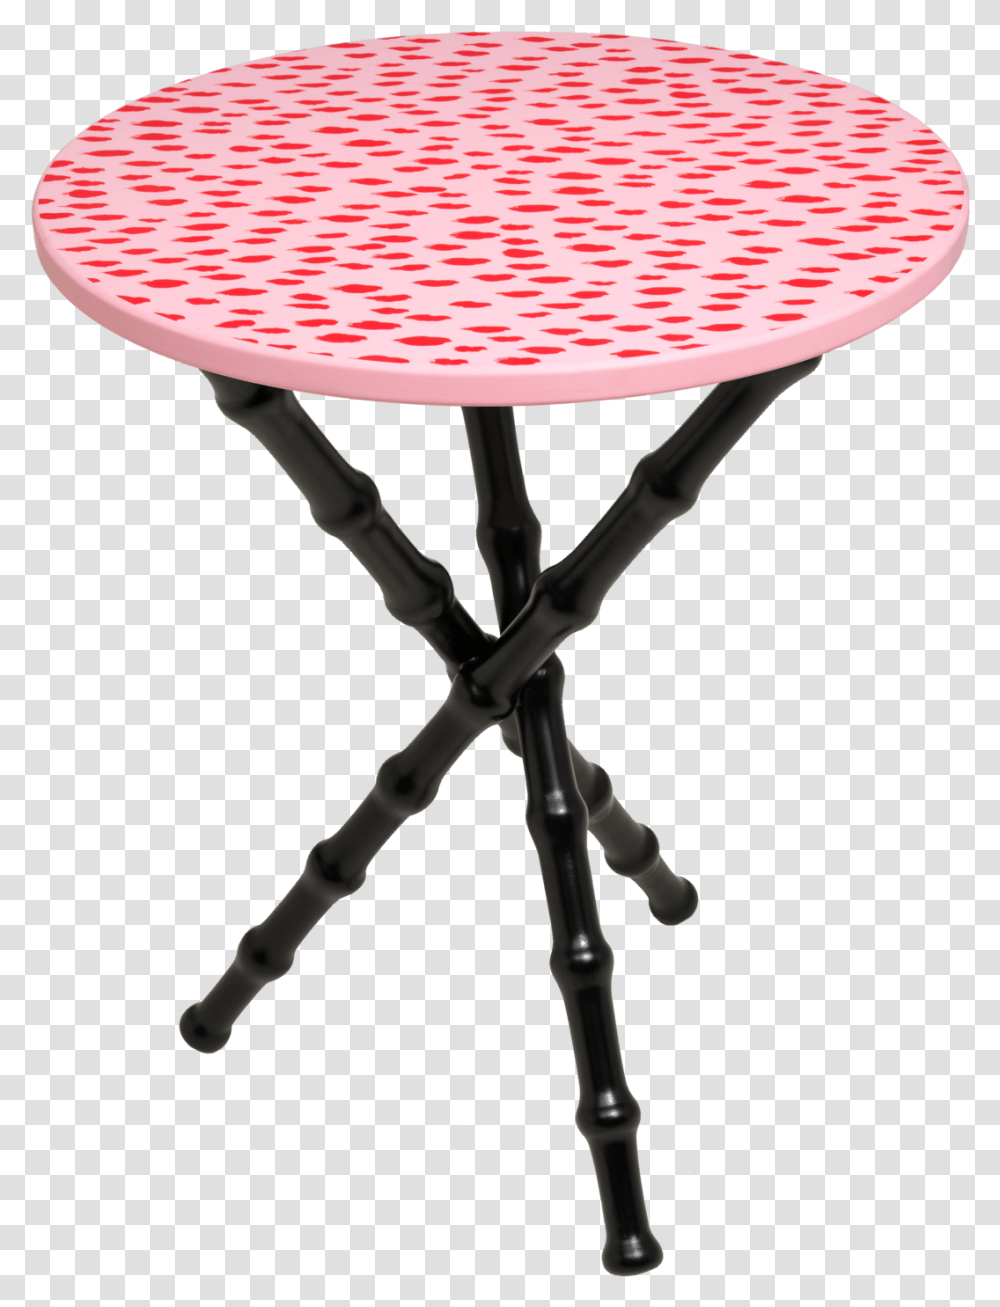 Ludo Drinks Table Bamboo Legs Outdoor Table, Furniture, Lamp, Racket, Chair Transparent Png